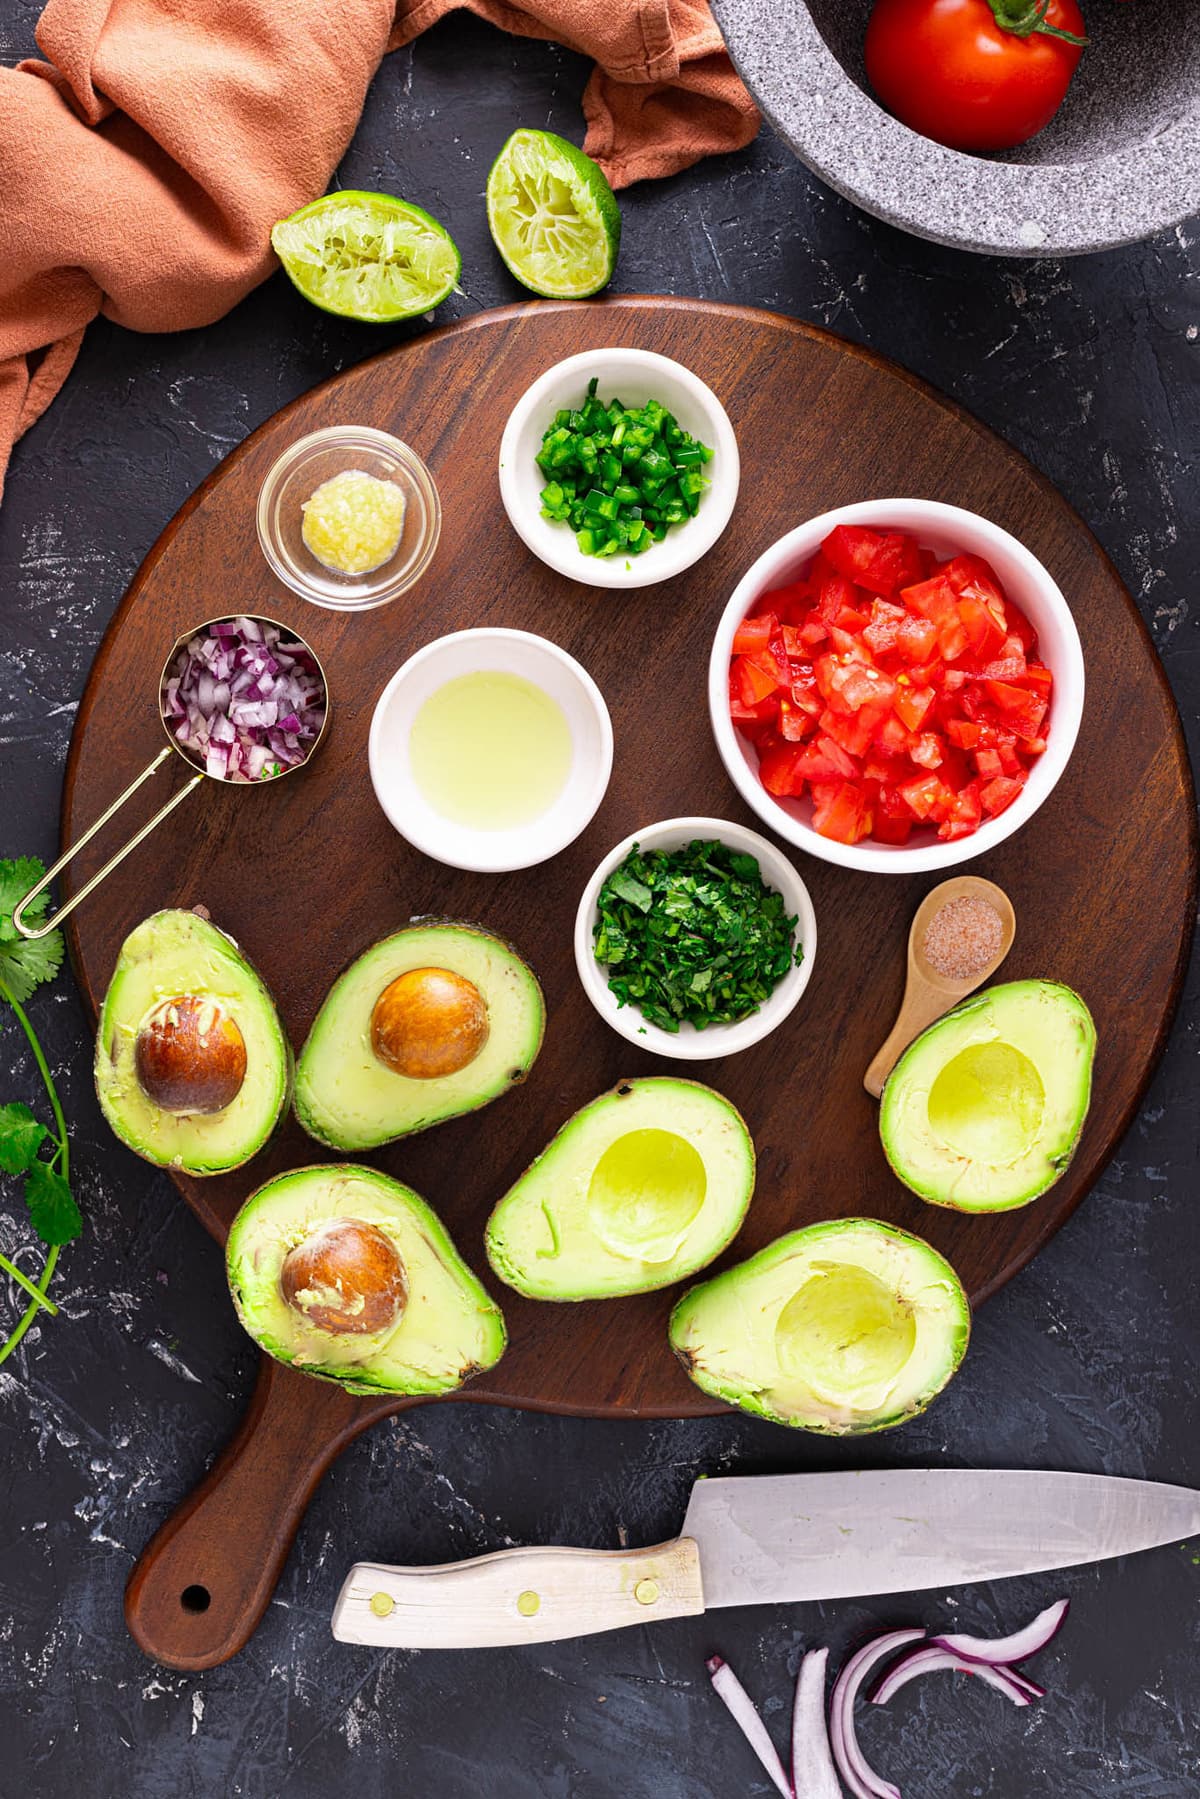 Ingredients for the best guacamole recipe.